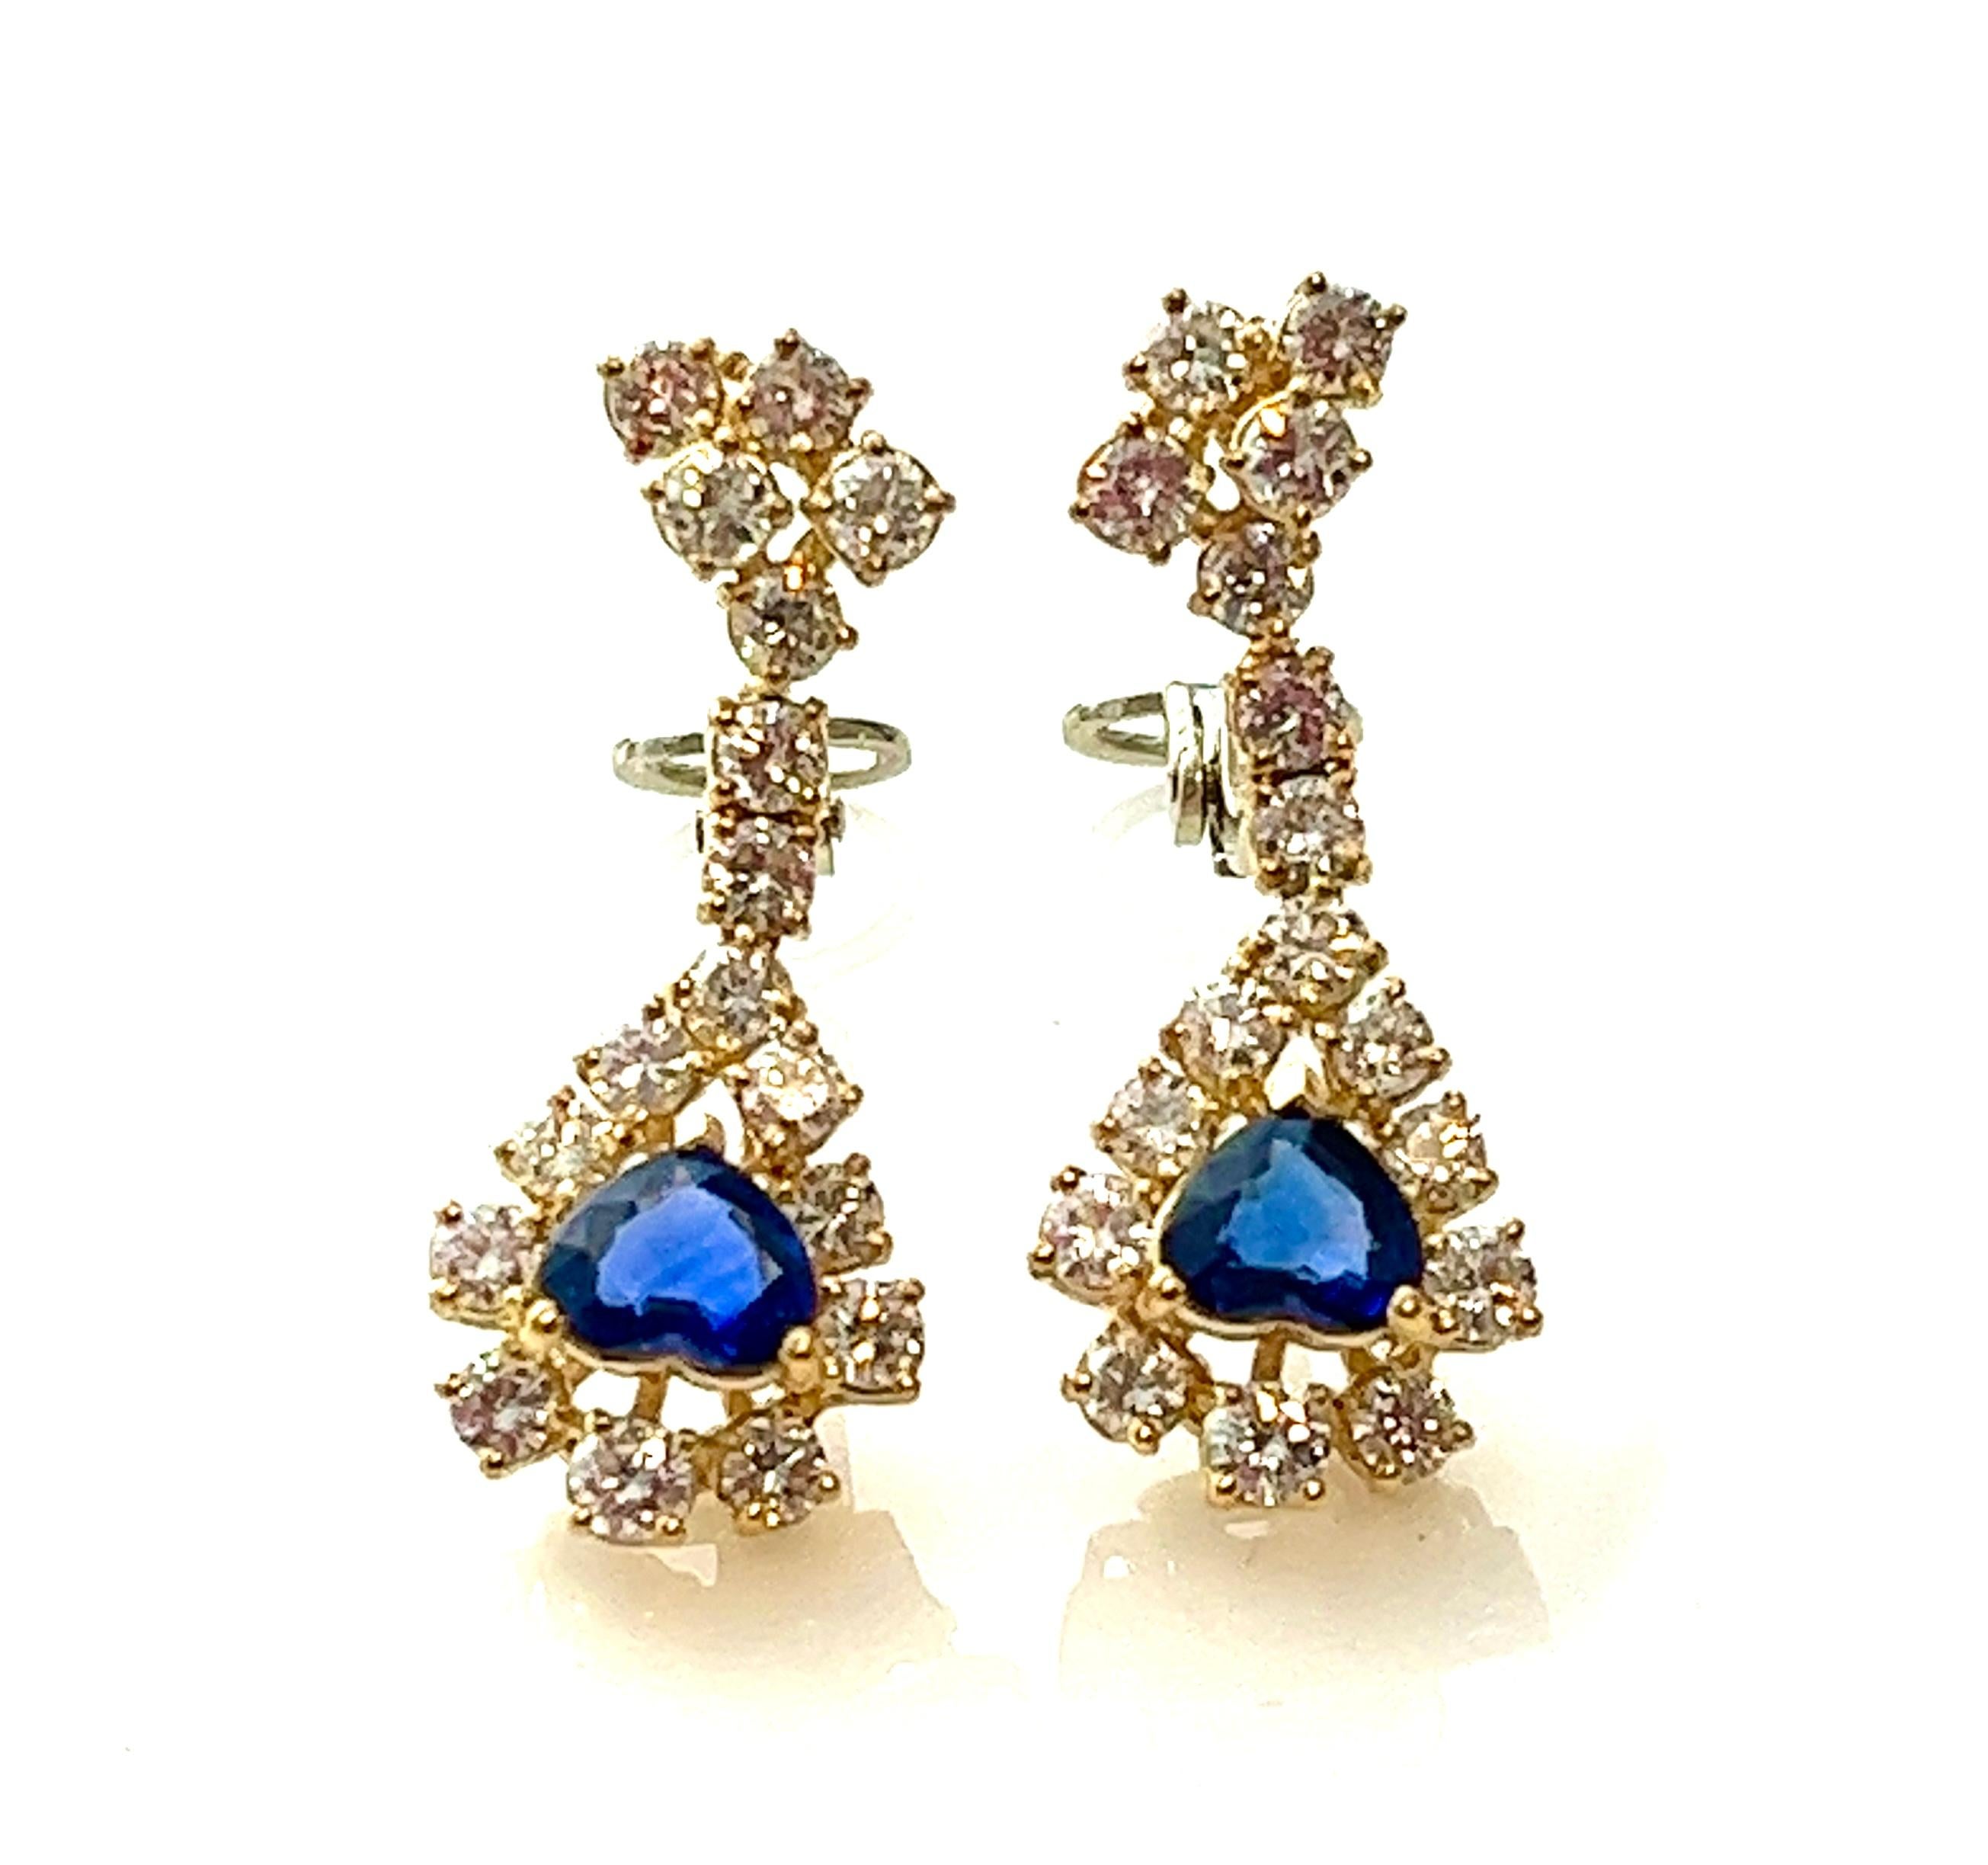 Vintage 5.60 carat Sapphire Diamond Dangle Earrings, 18K  In Excellent Condition For Sale In Miami, FL